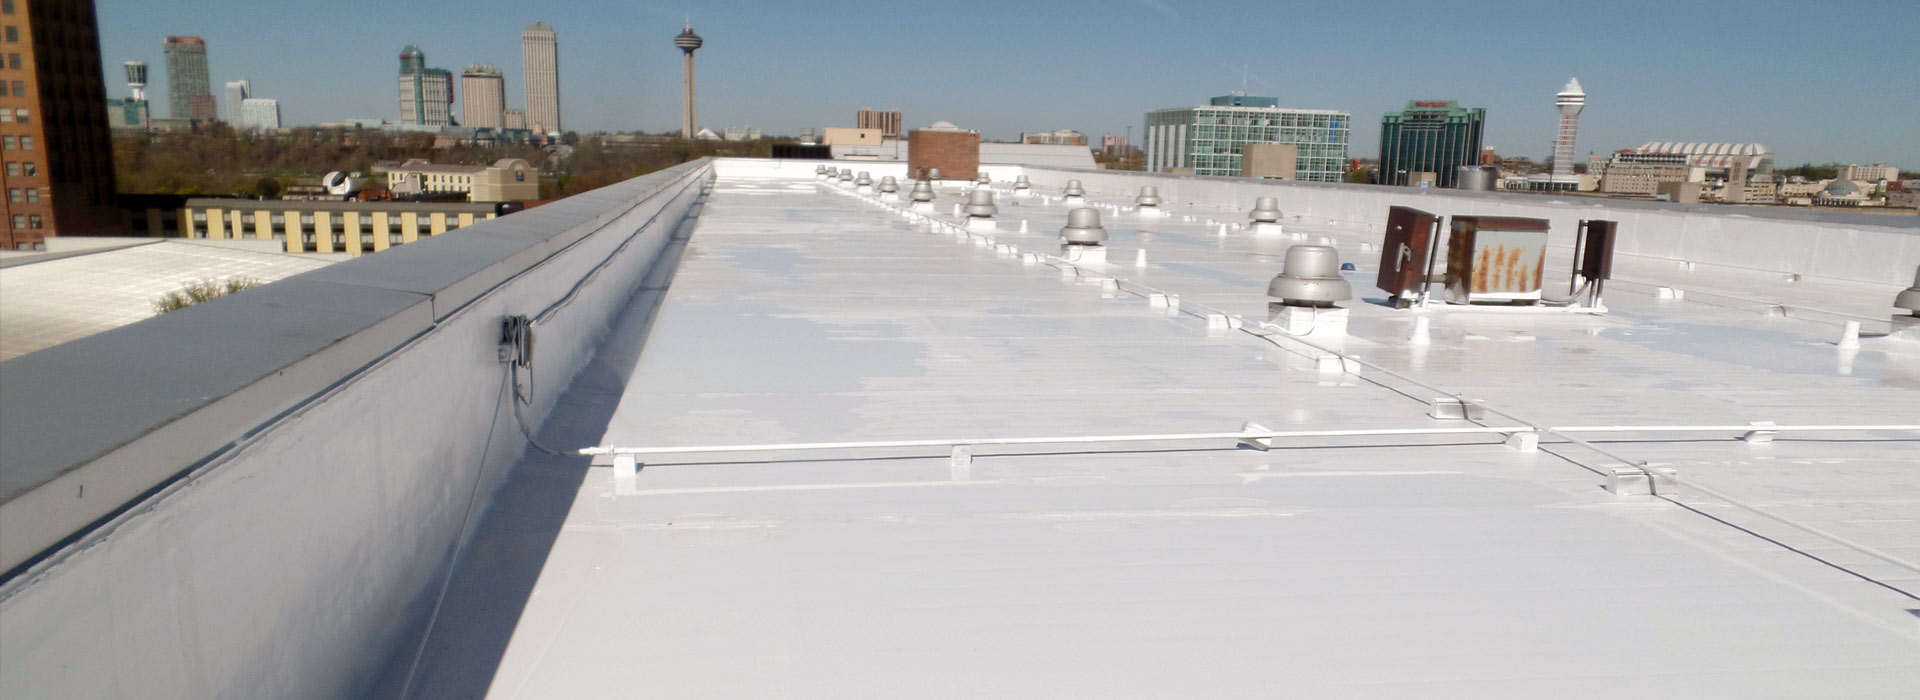 roof coatings by United Thermal Systems